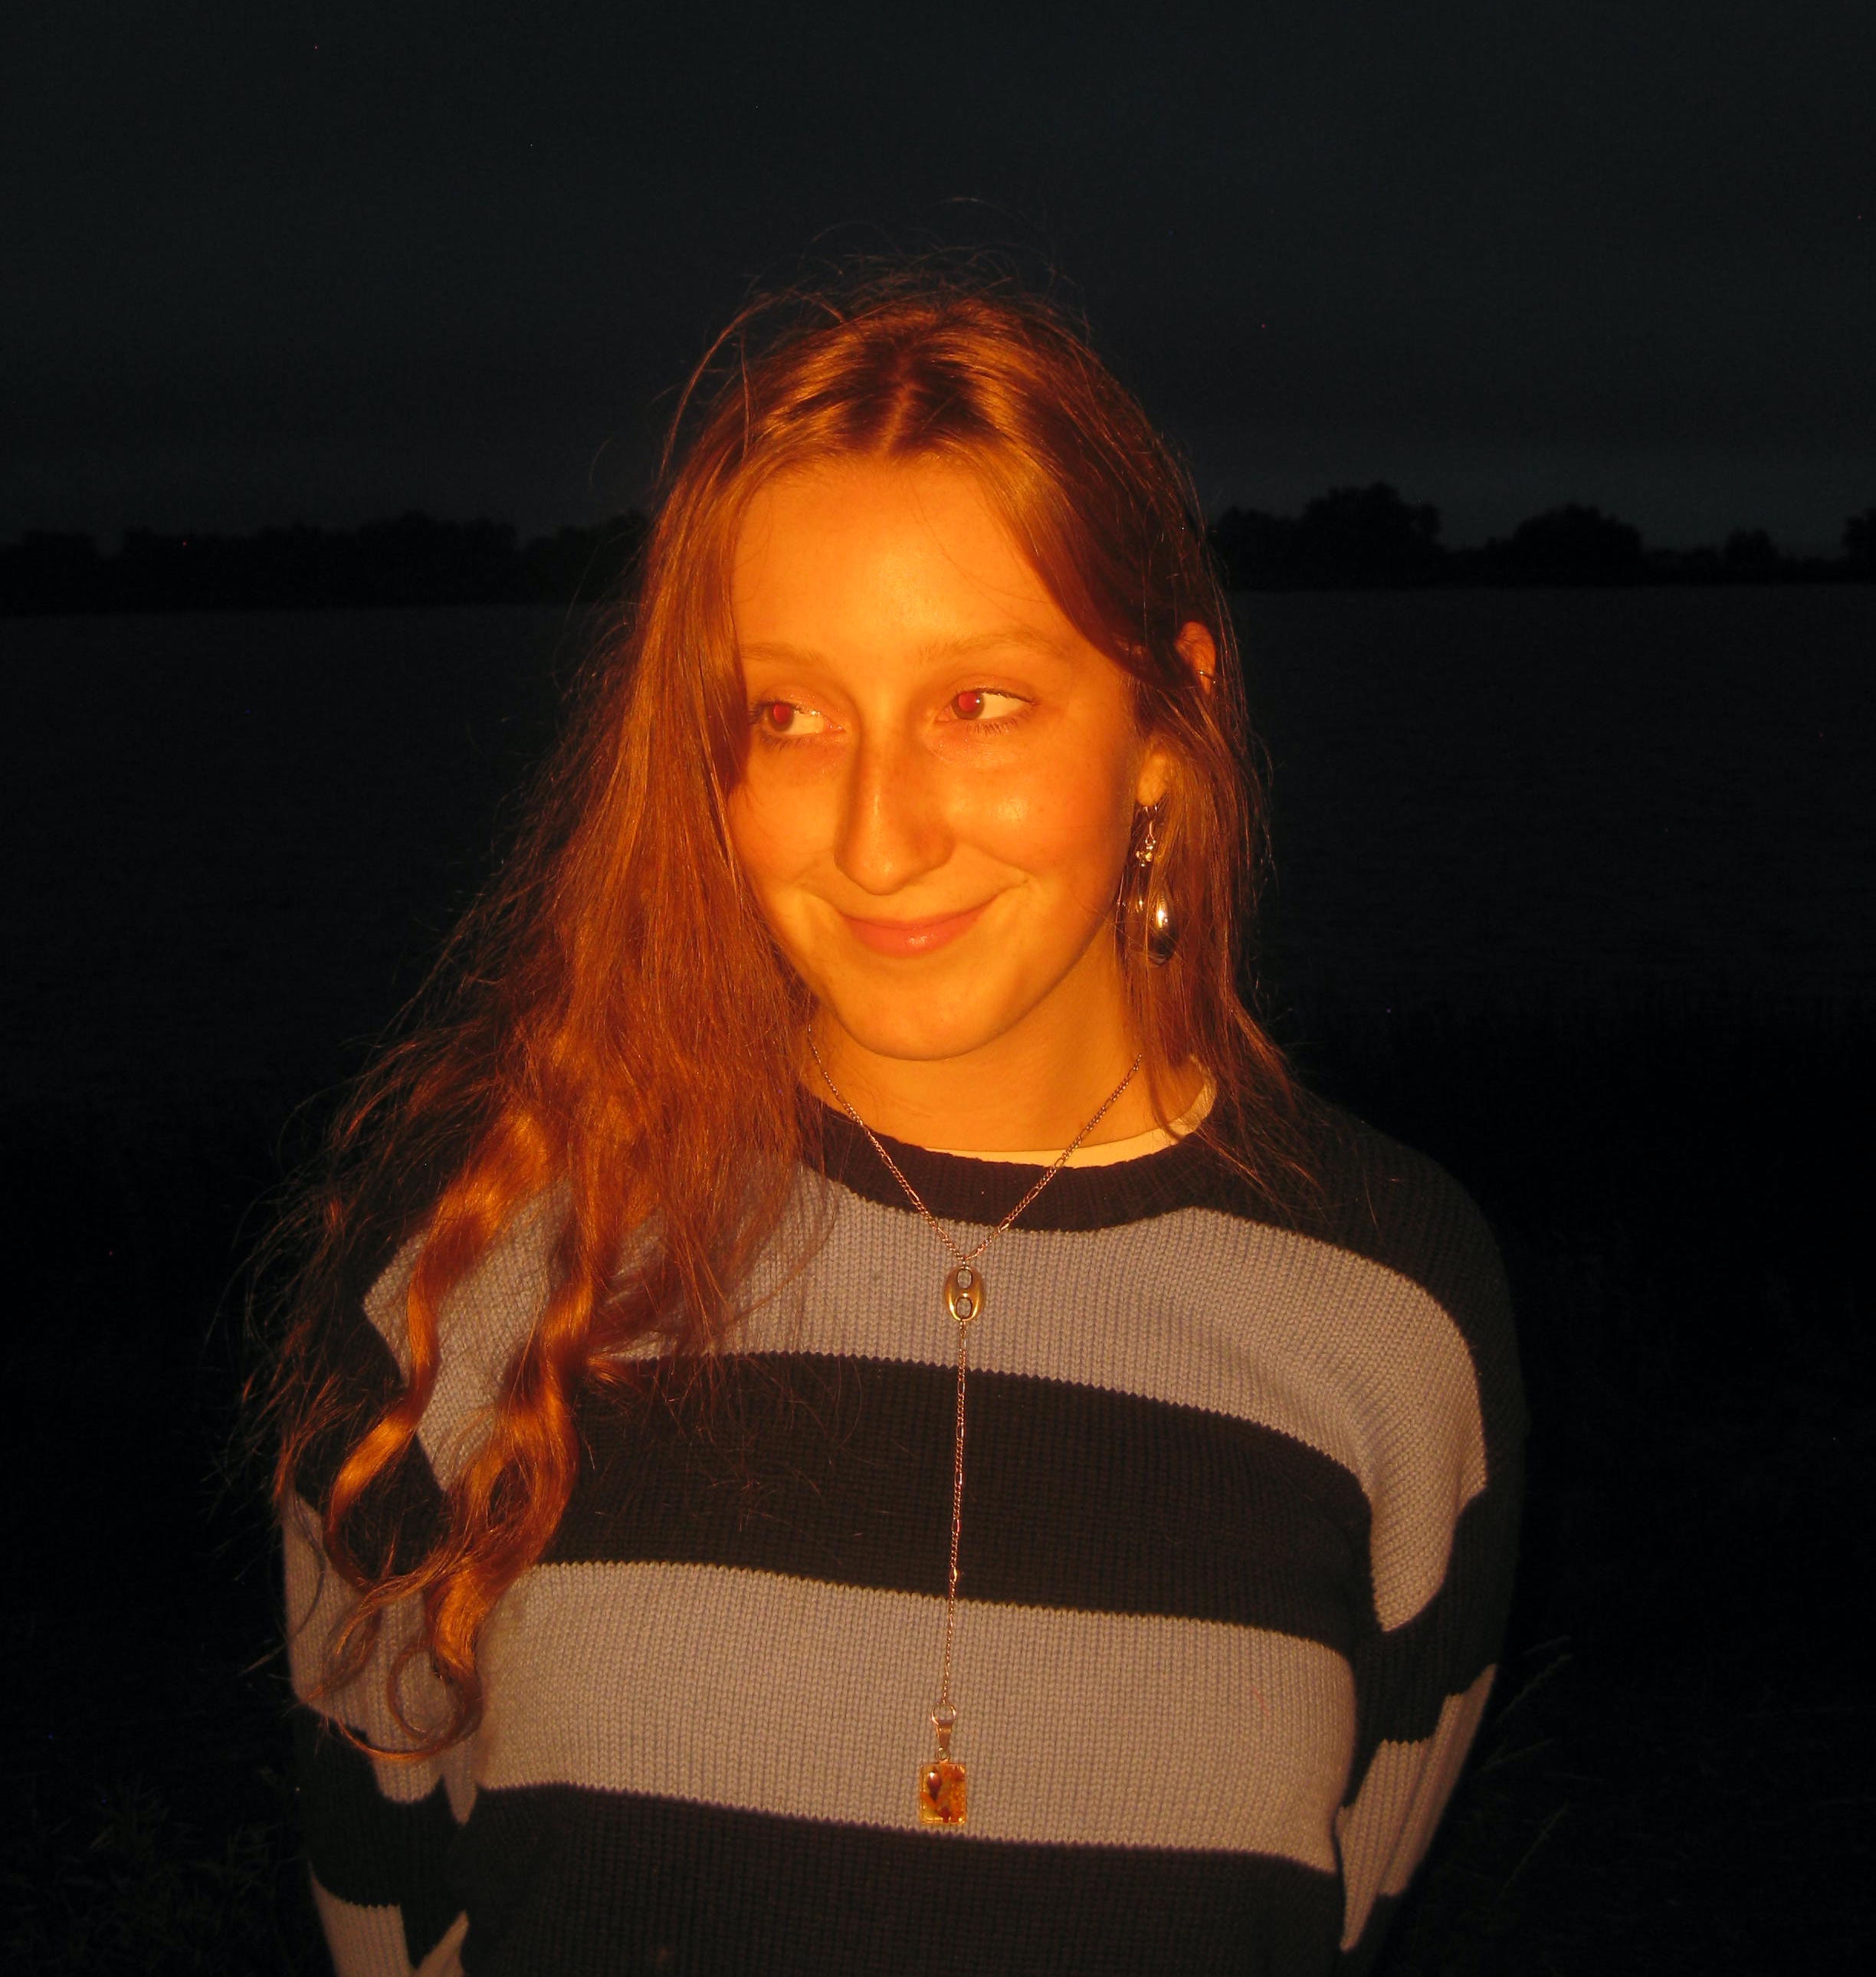 Photo of Olivia MacLeod. The background is dark and she is lit up by a red hue. She's smiling softly, looking in another direction.